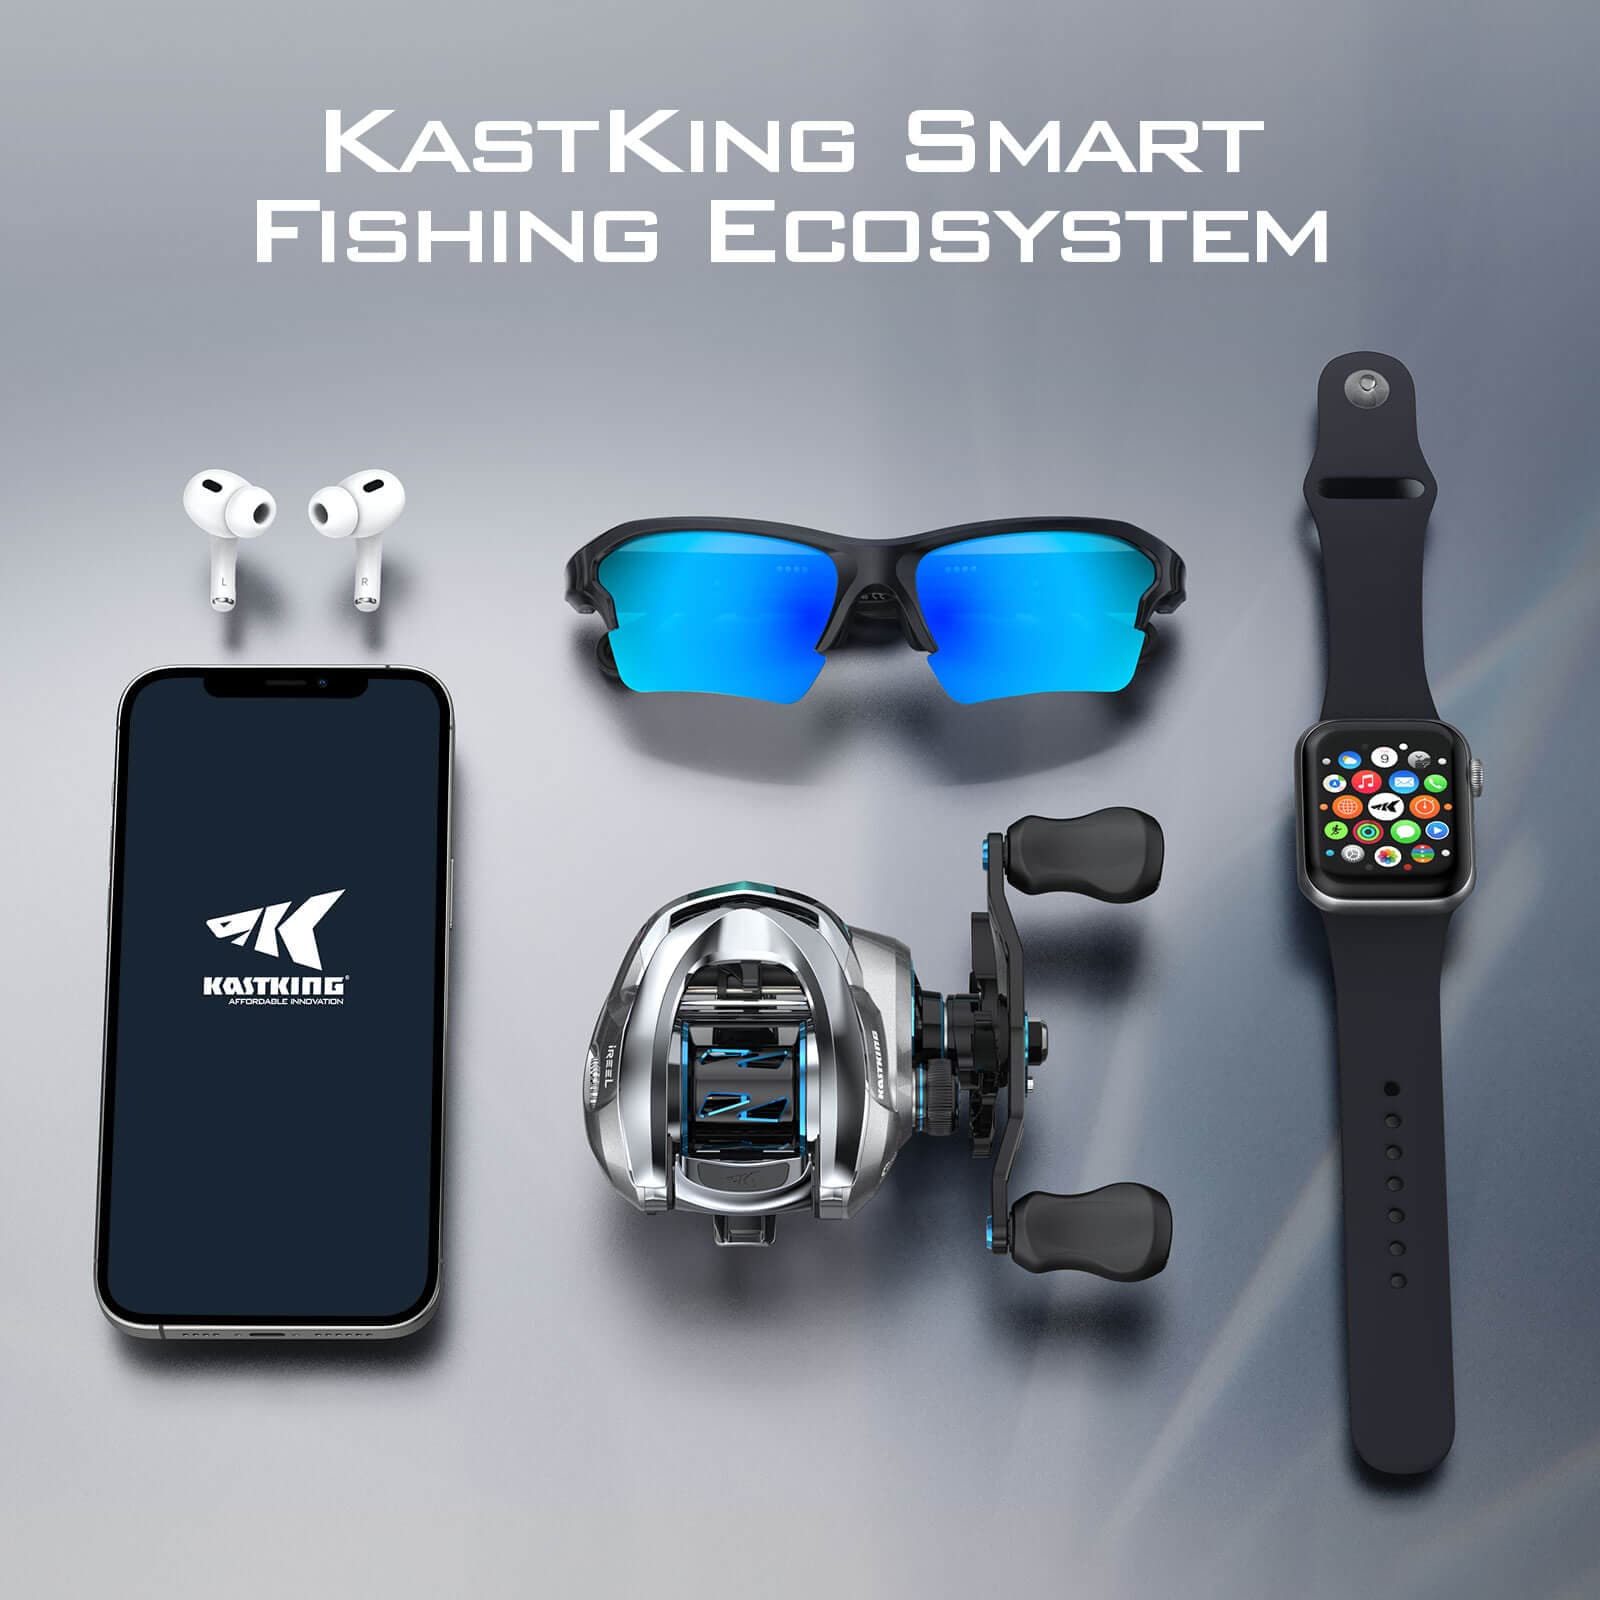 Check out some of the advanced features of the @KastKing iReel One